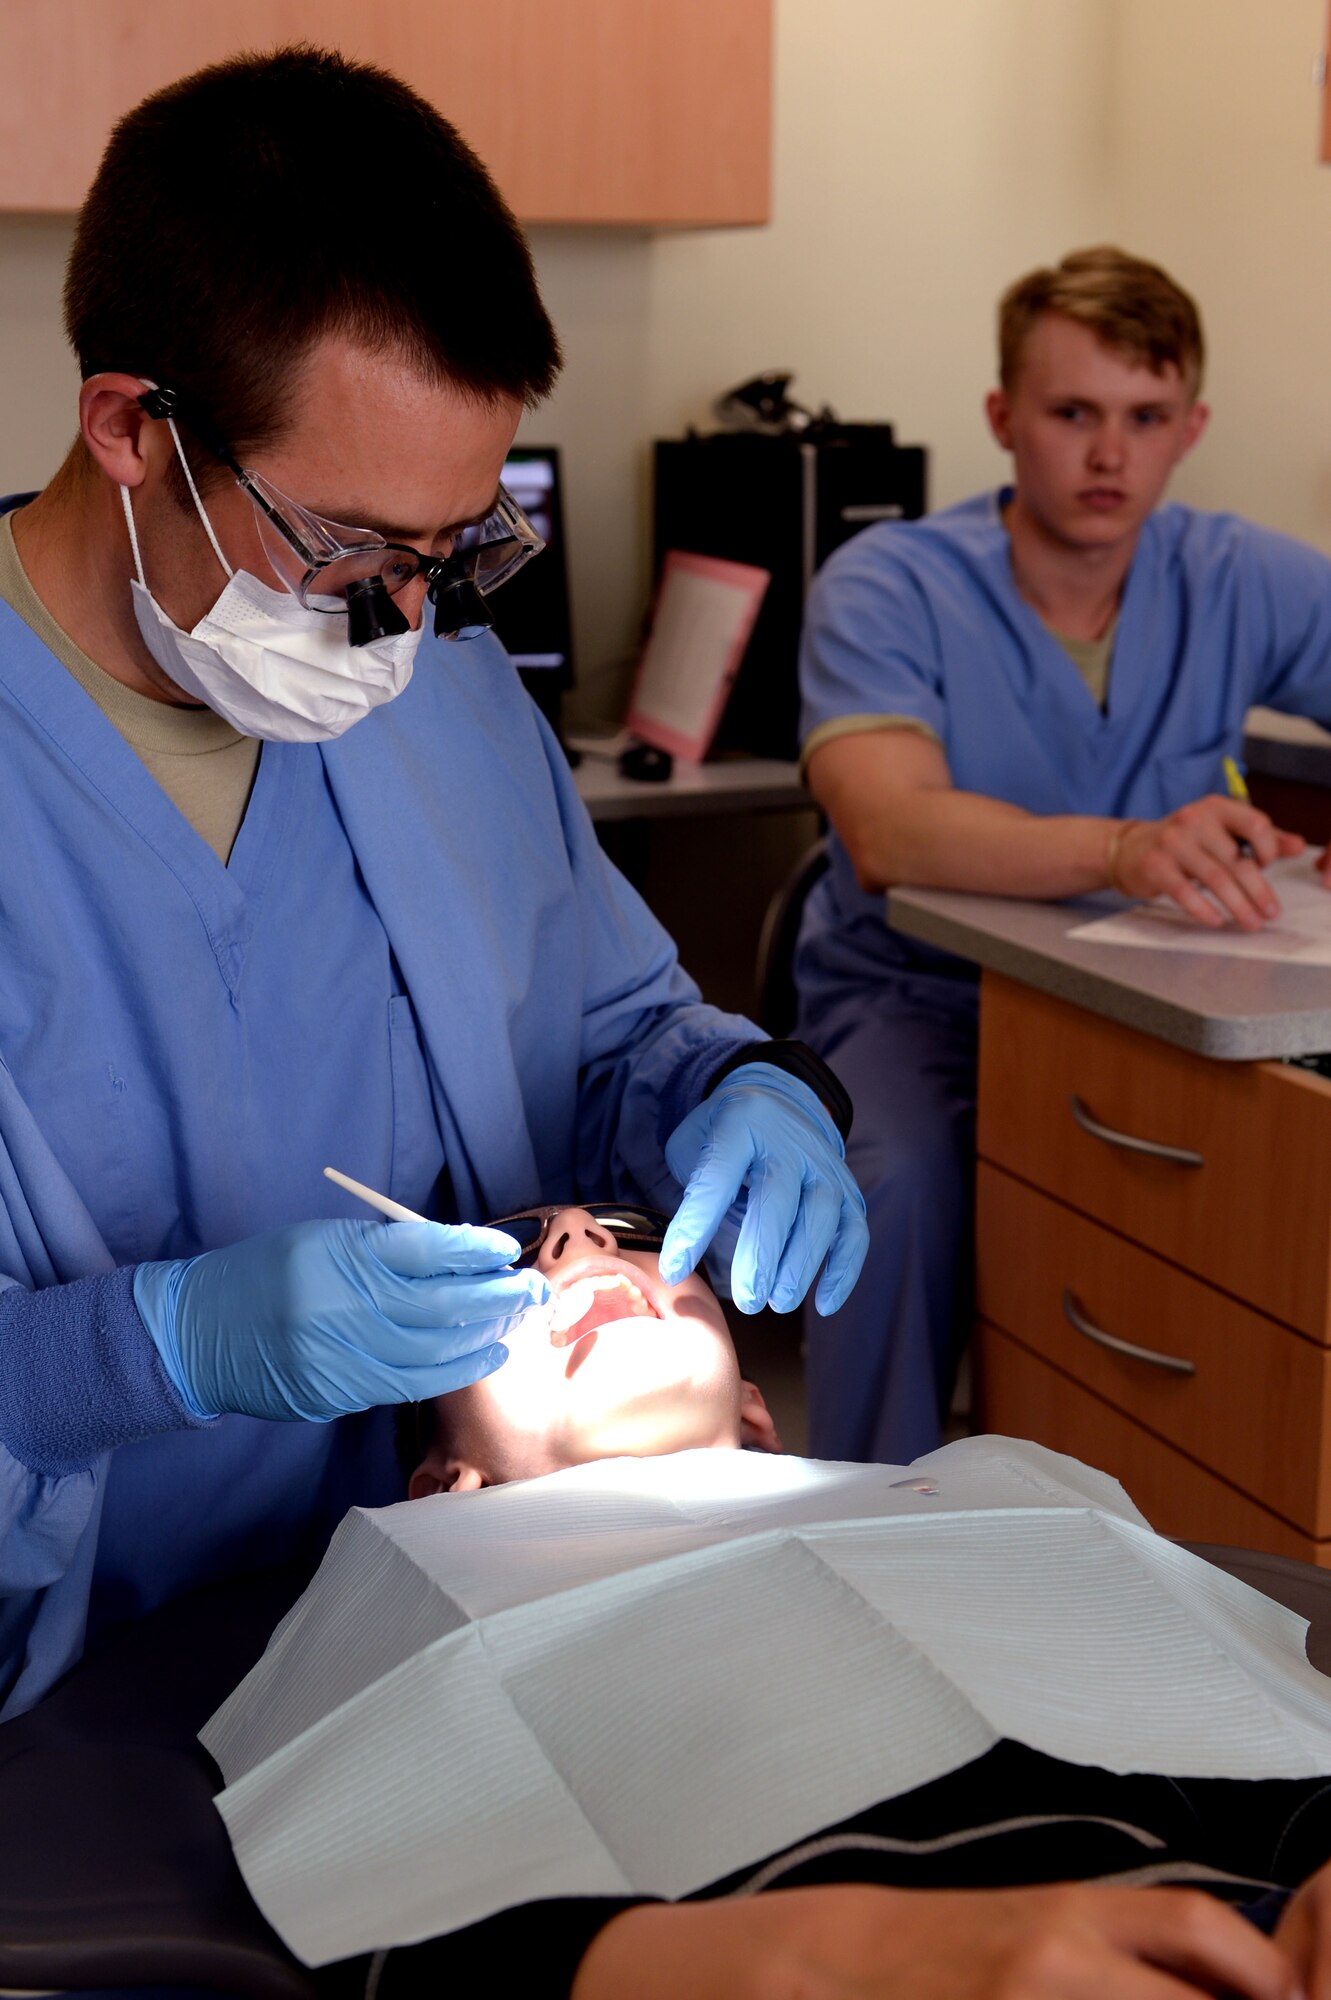 U.S. Air Force Capt. Mark Olsen, a 52nd Dental Squadron dentist, conducts an oral exam of Sean Jones, 9, while Airman 1st Class Evan Wolfe, 52nd DS dental assistant, annotates Olsen’s findings on Spangdahlem Air Base, Germany, April 23, 2014. While the clinic provides dental care to dependents as needed, most child patients are seen during kids’ clinics held twice a year. (U.S. Air Force photo by Senior Airman Alexis Siekert/Released)